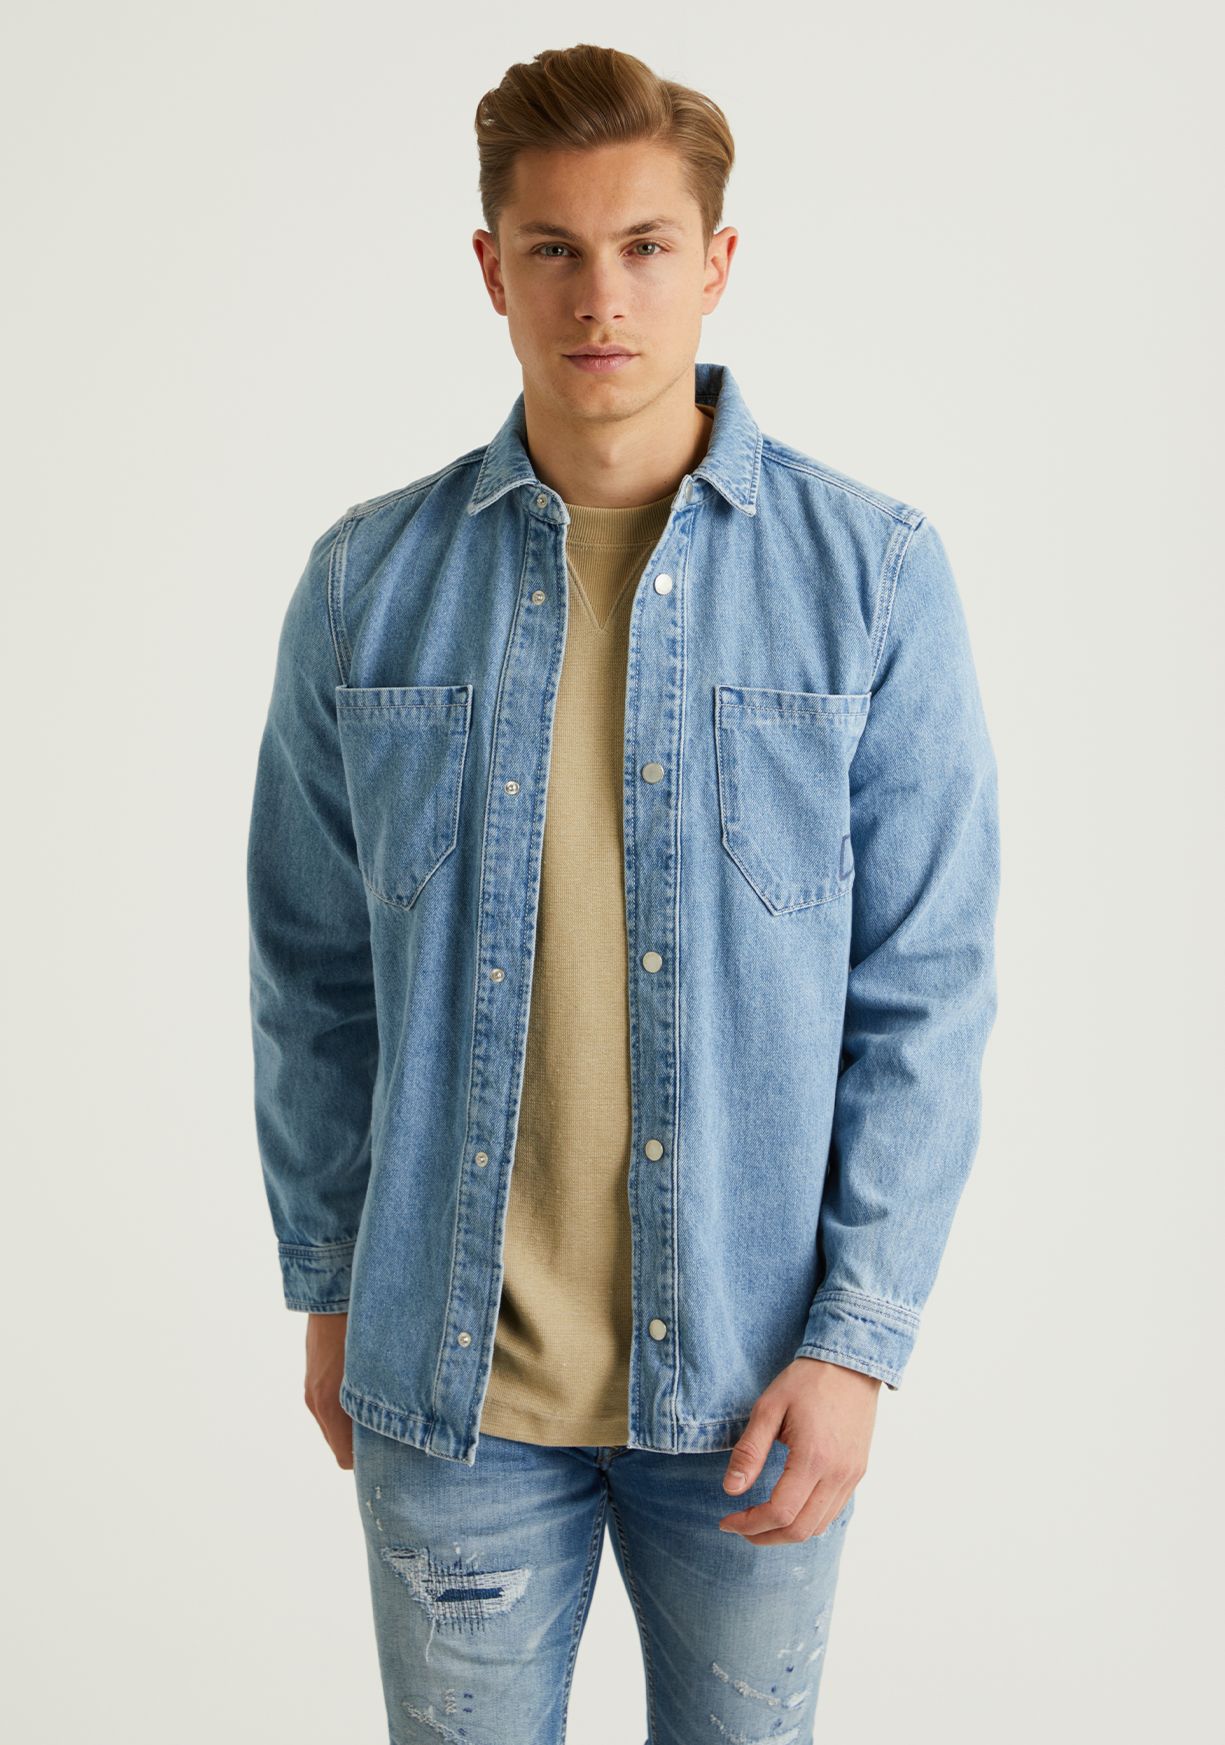 Should Denim Shirts Be Tucked in or Out? | Tapered Menswear